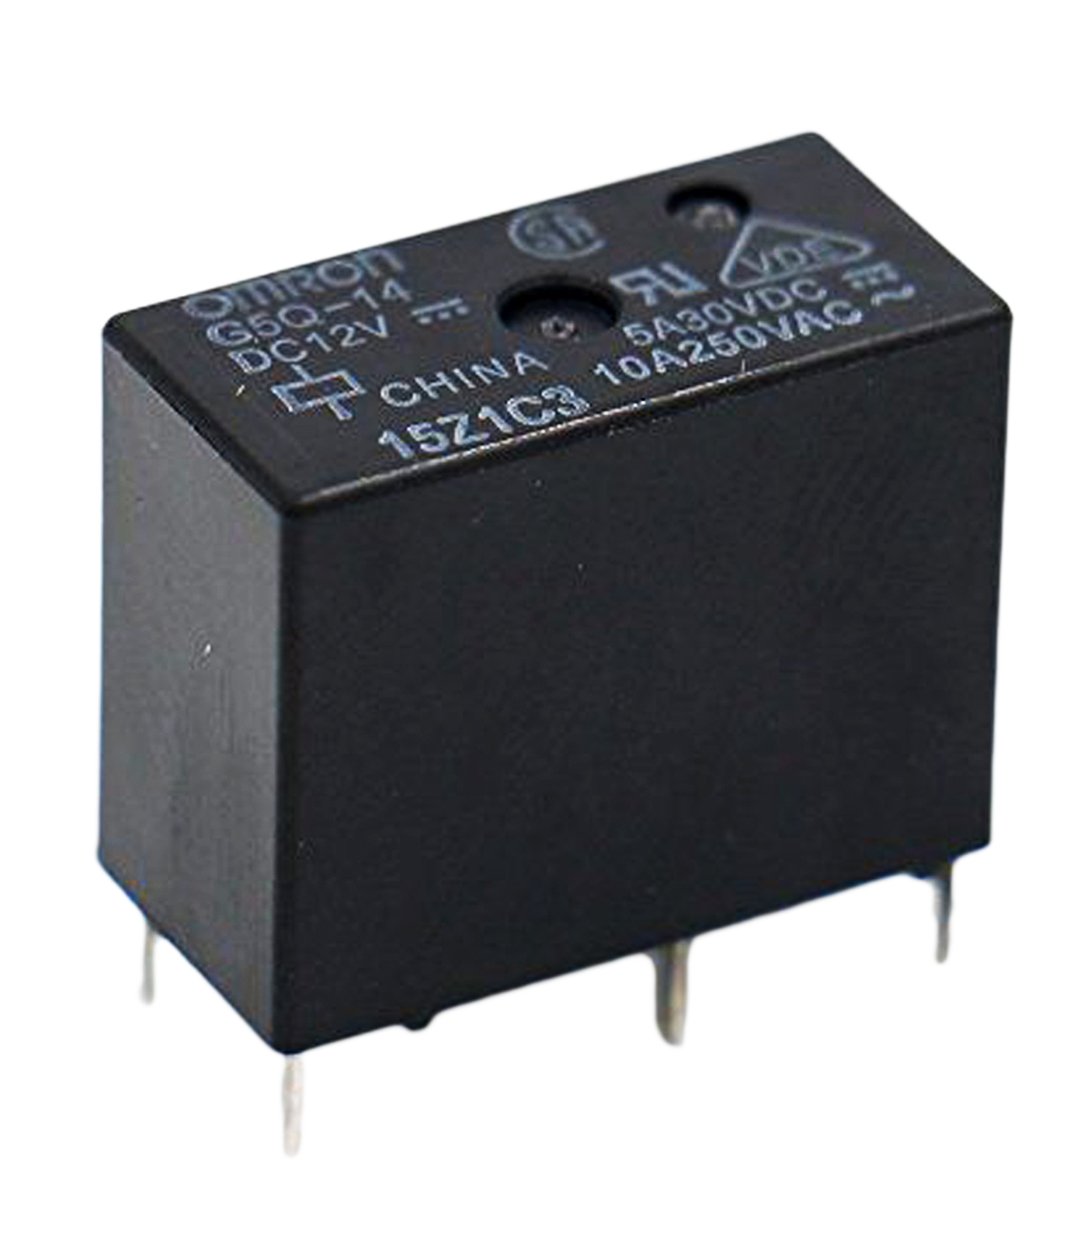  OMRON G5Q-14-DC12 POWER RELAY